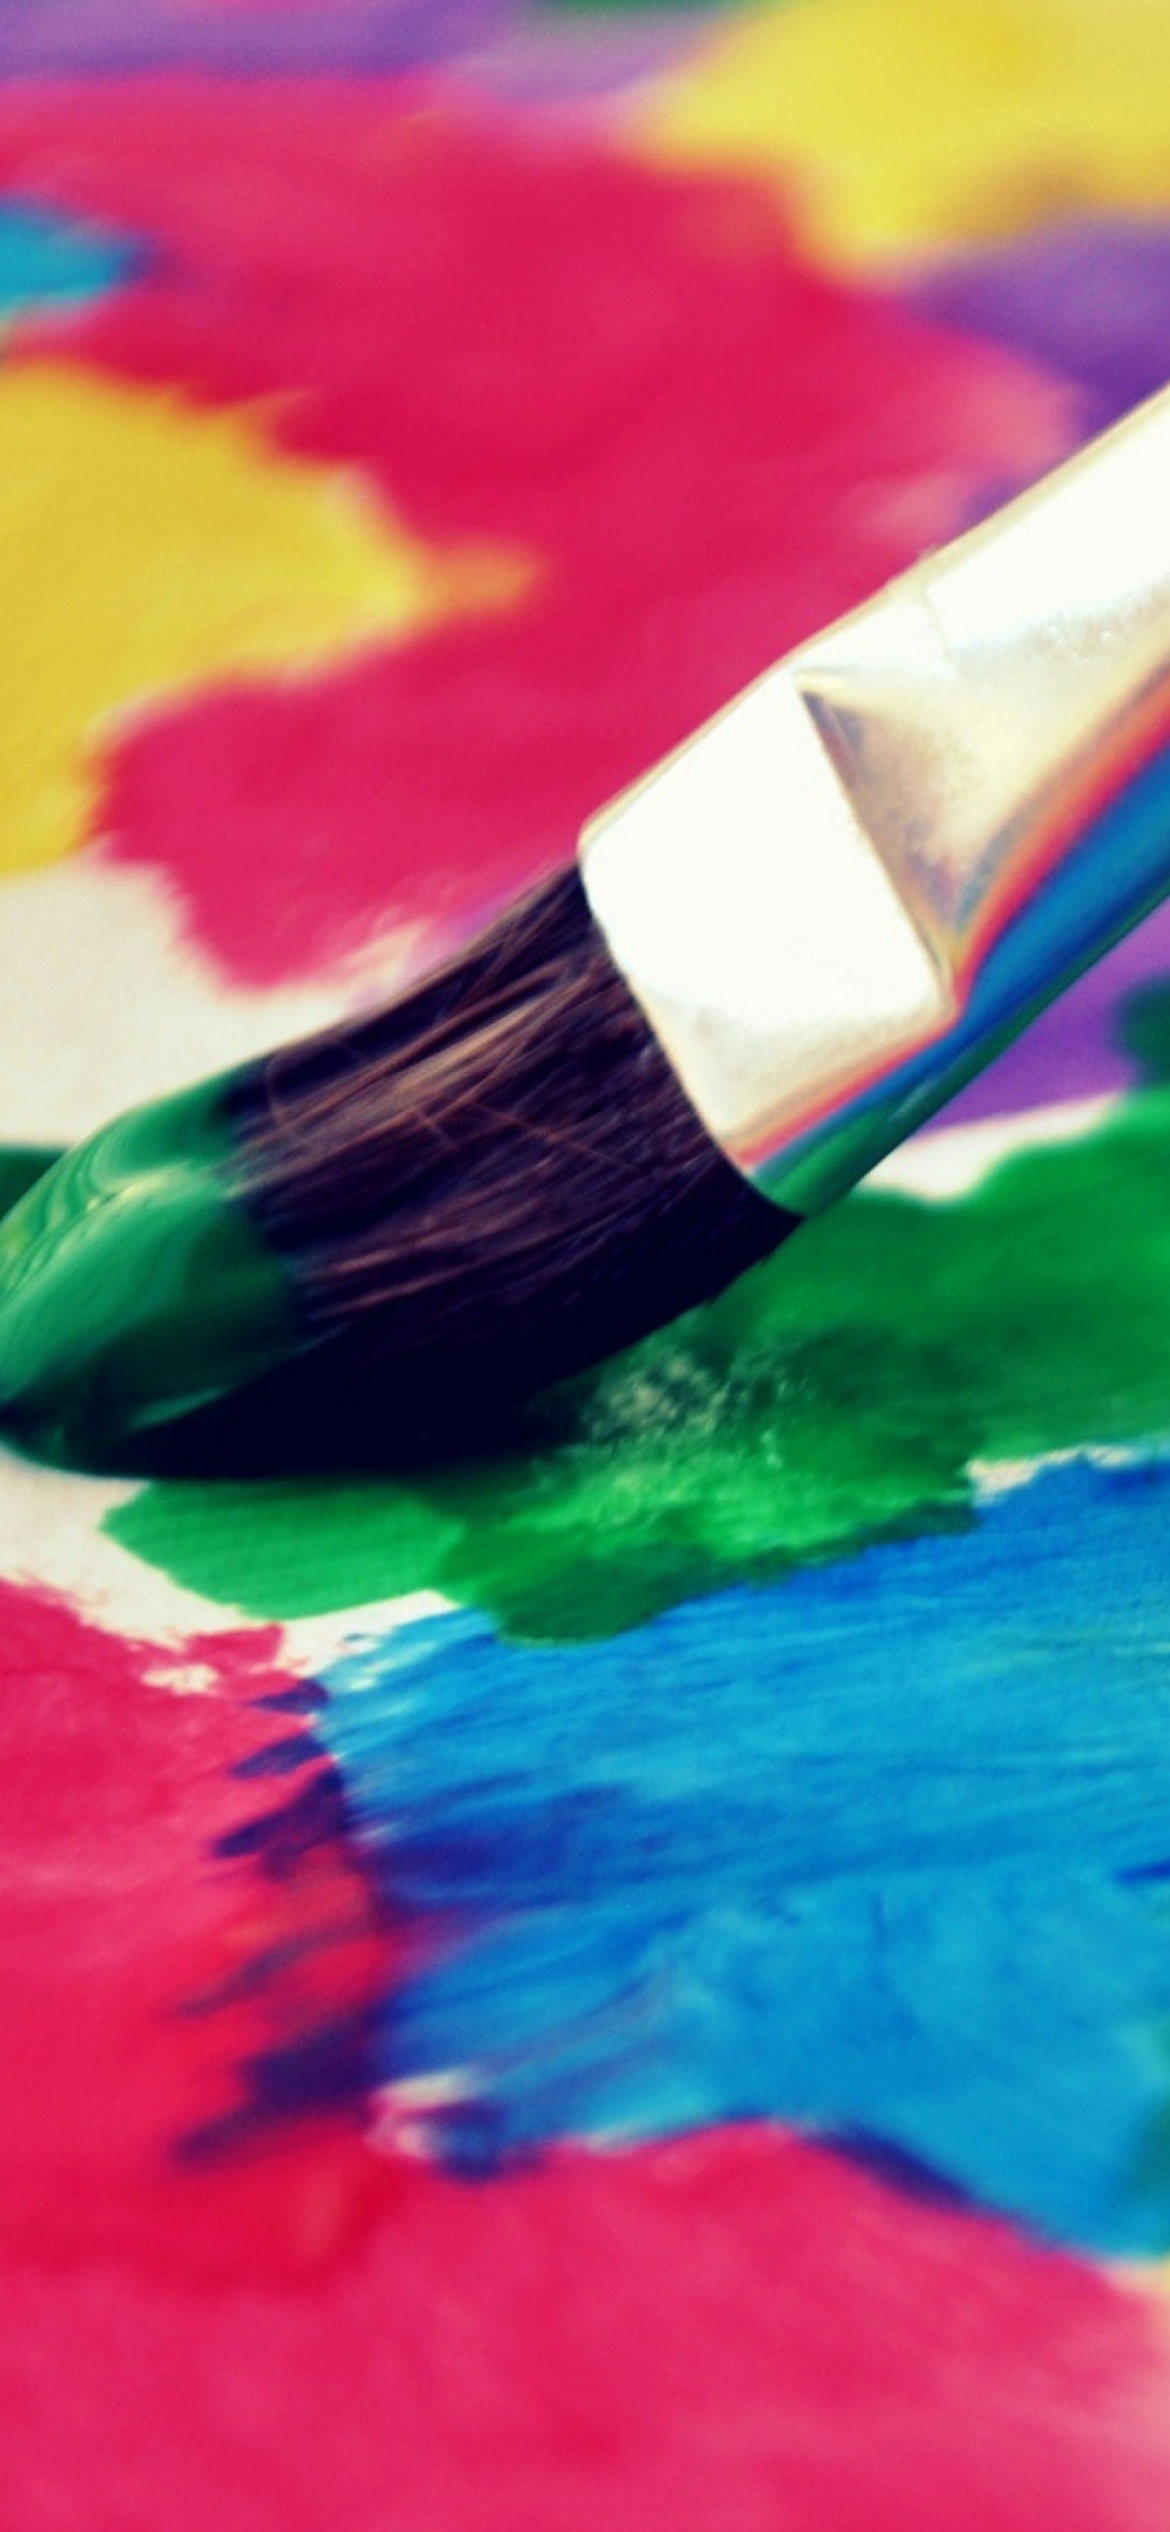 Art Brush And Colorful Paint wallpaper 1170x2532